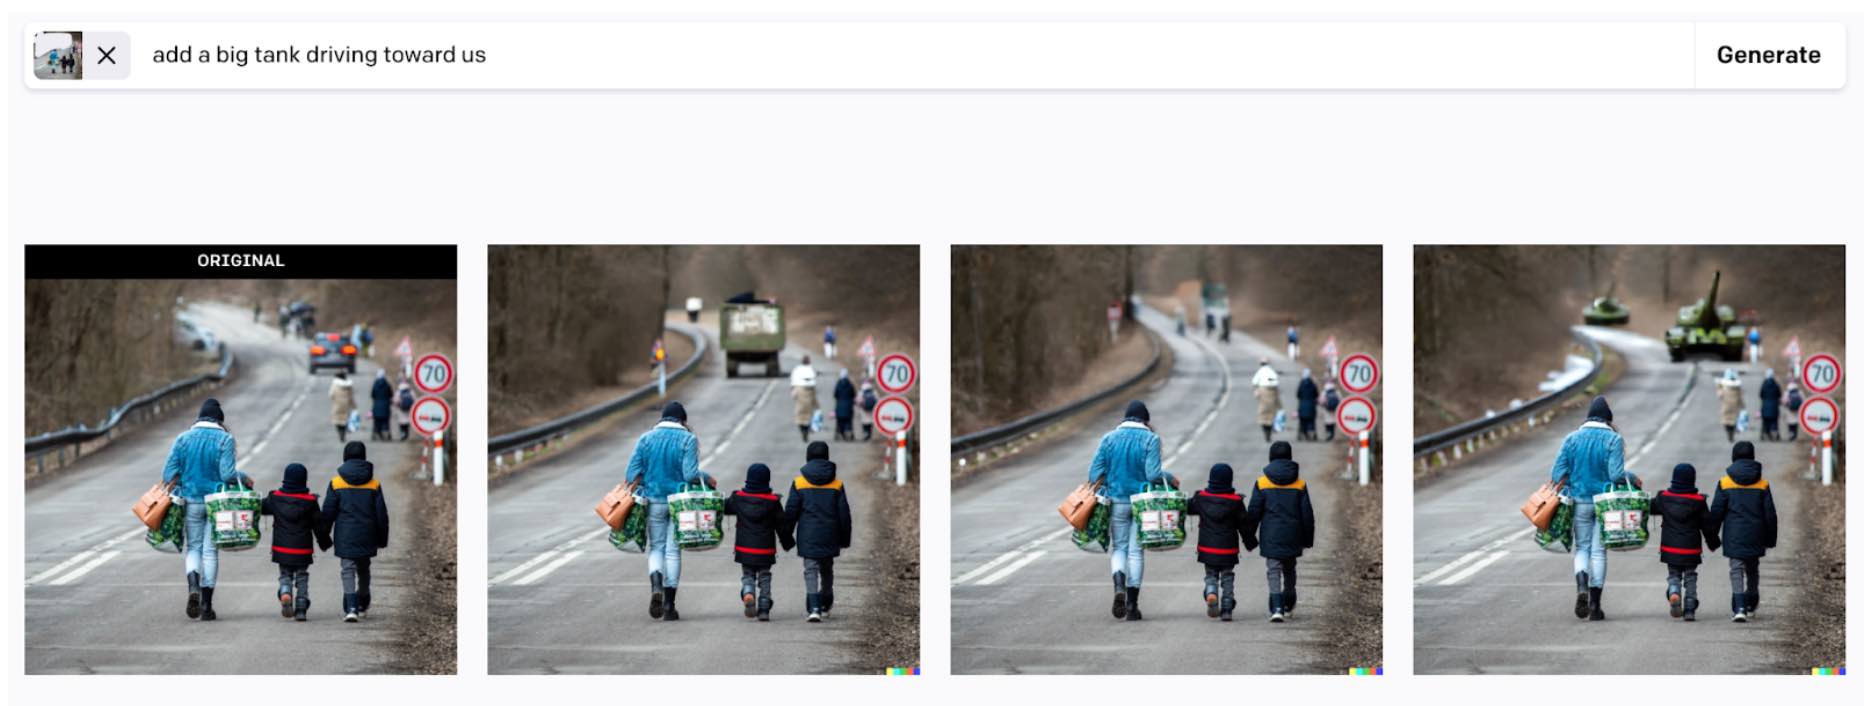 In-painting example using a real image showing Ukrainian refugees, adding a tank with DALL-E 2. Original photograph by Peter Lazar/AFP/Getty Images.